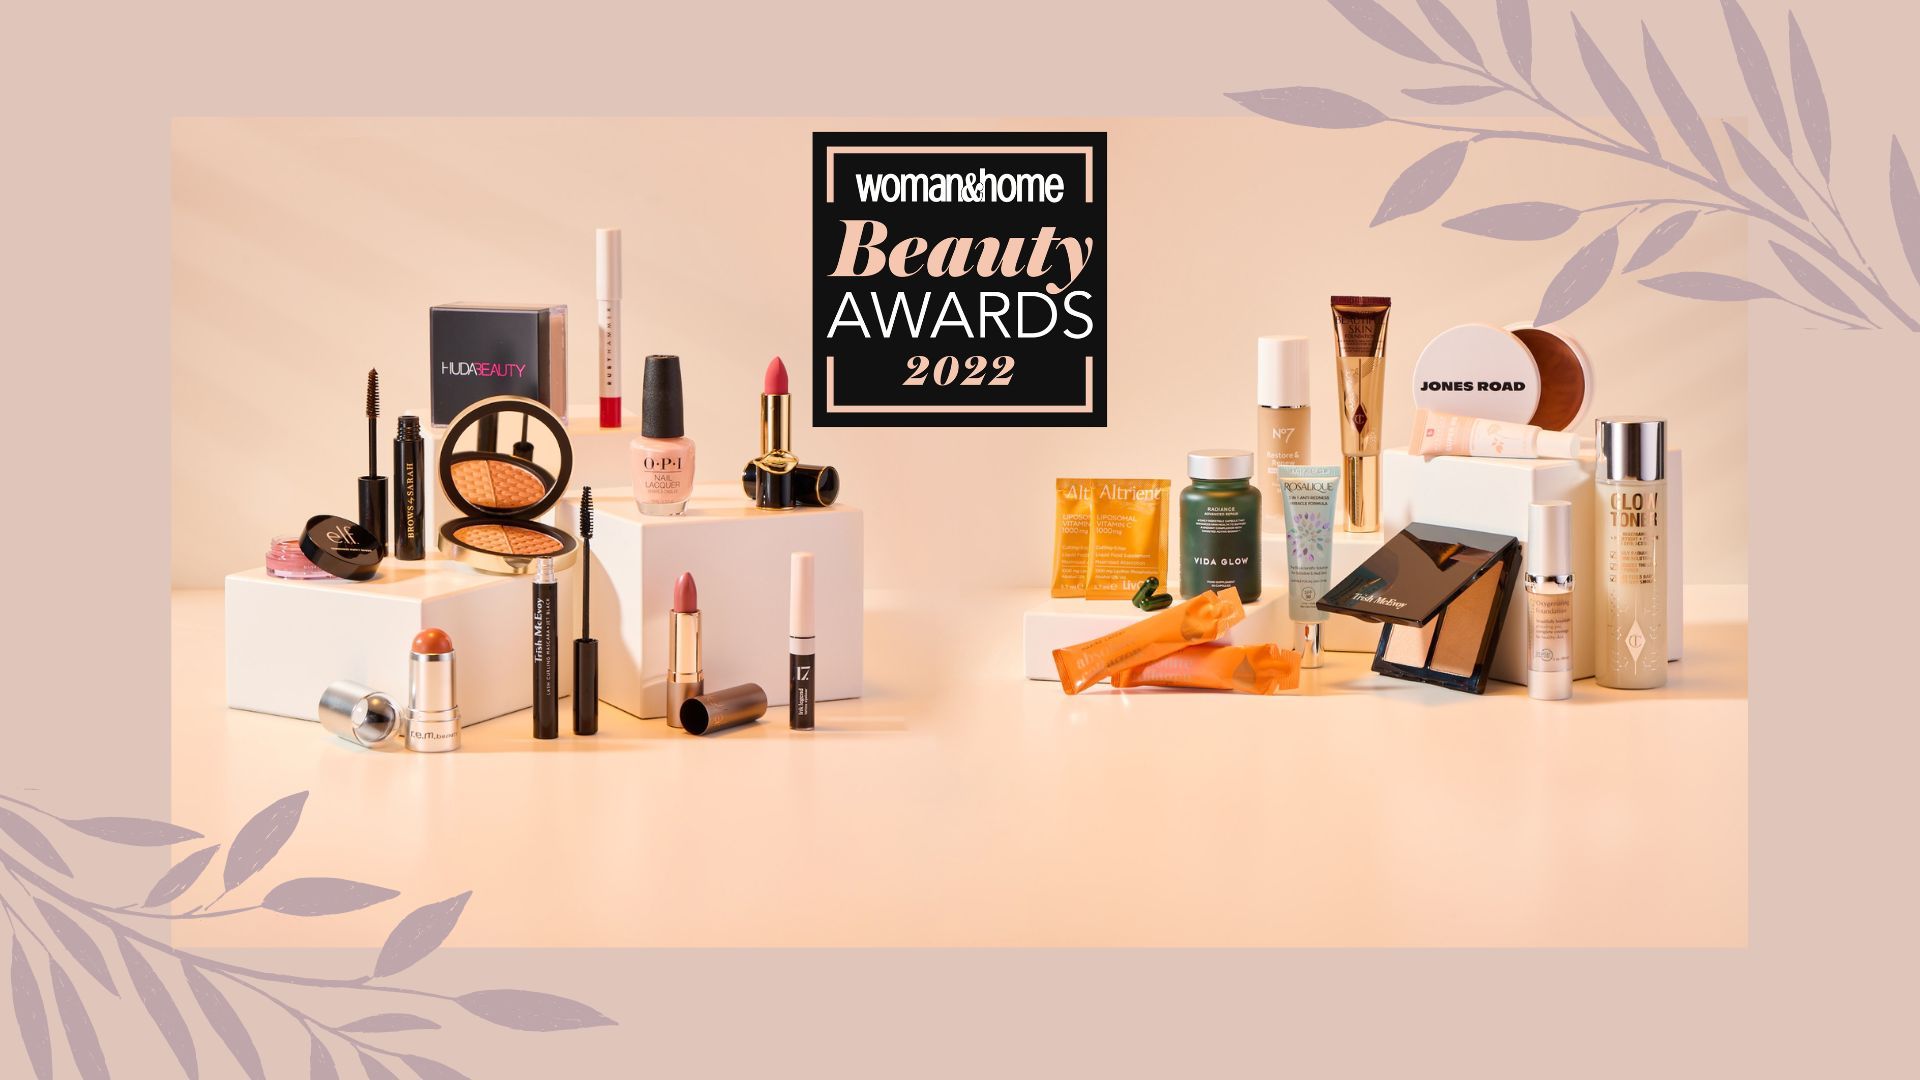 Announcing our 2022 woman&home beauty awards winners! | Woman & Home